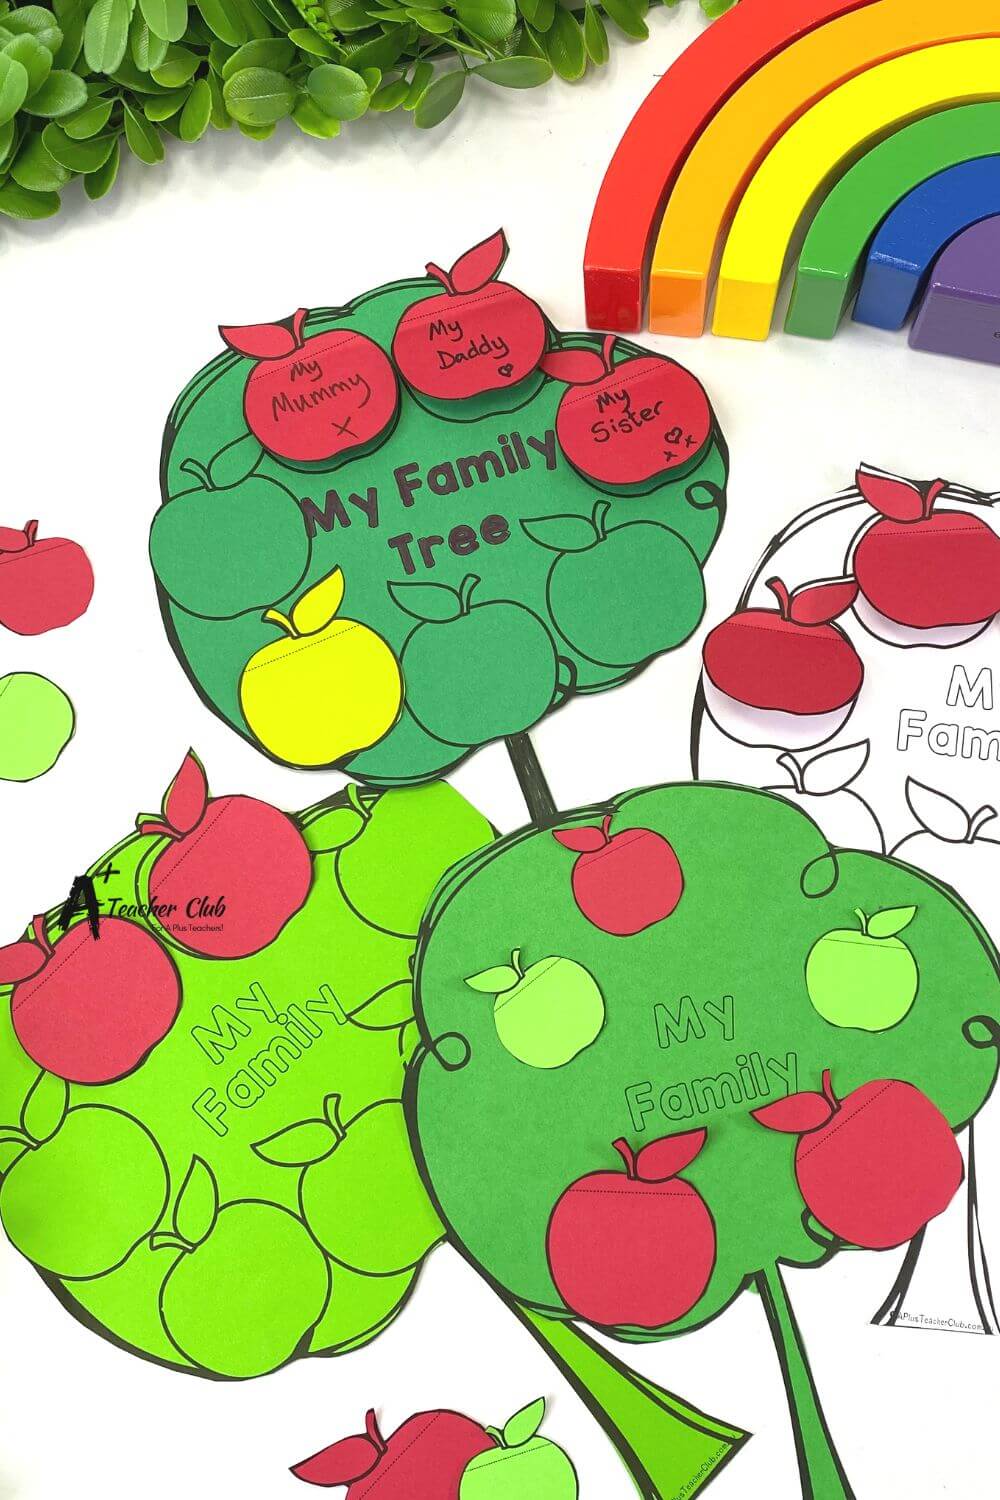 About Me My Family Tree Templates